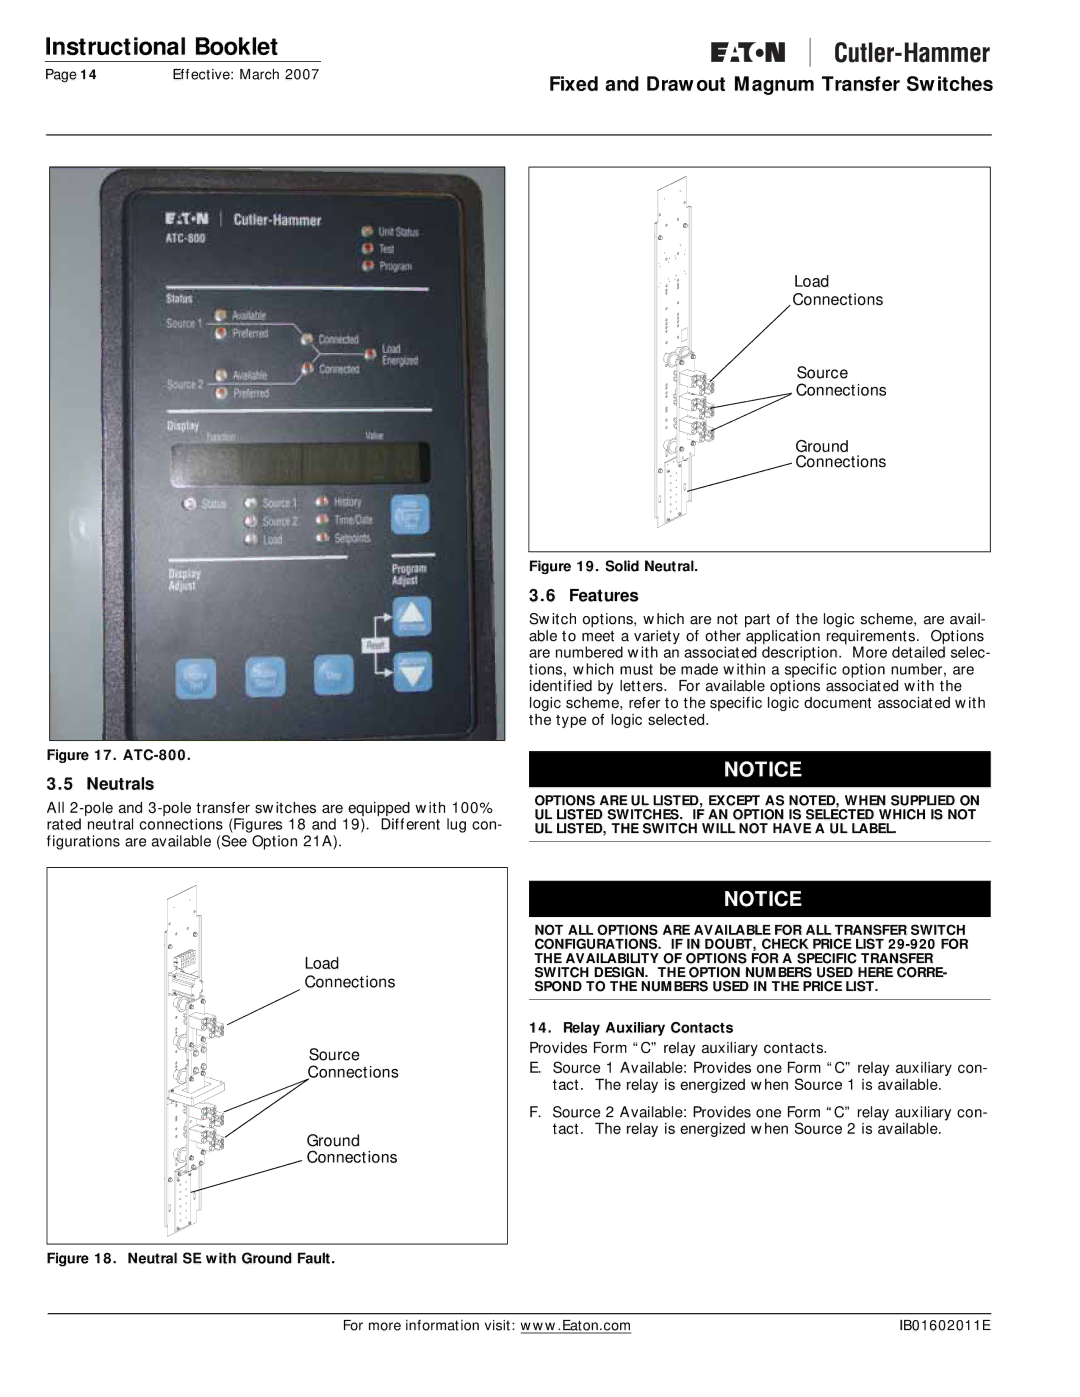 Eaton Electrical Magnum Transfer Switch manual Neutrals, Features, Relay Auxiliary Contacts 